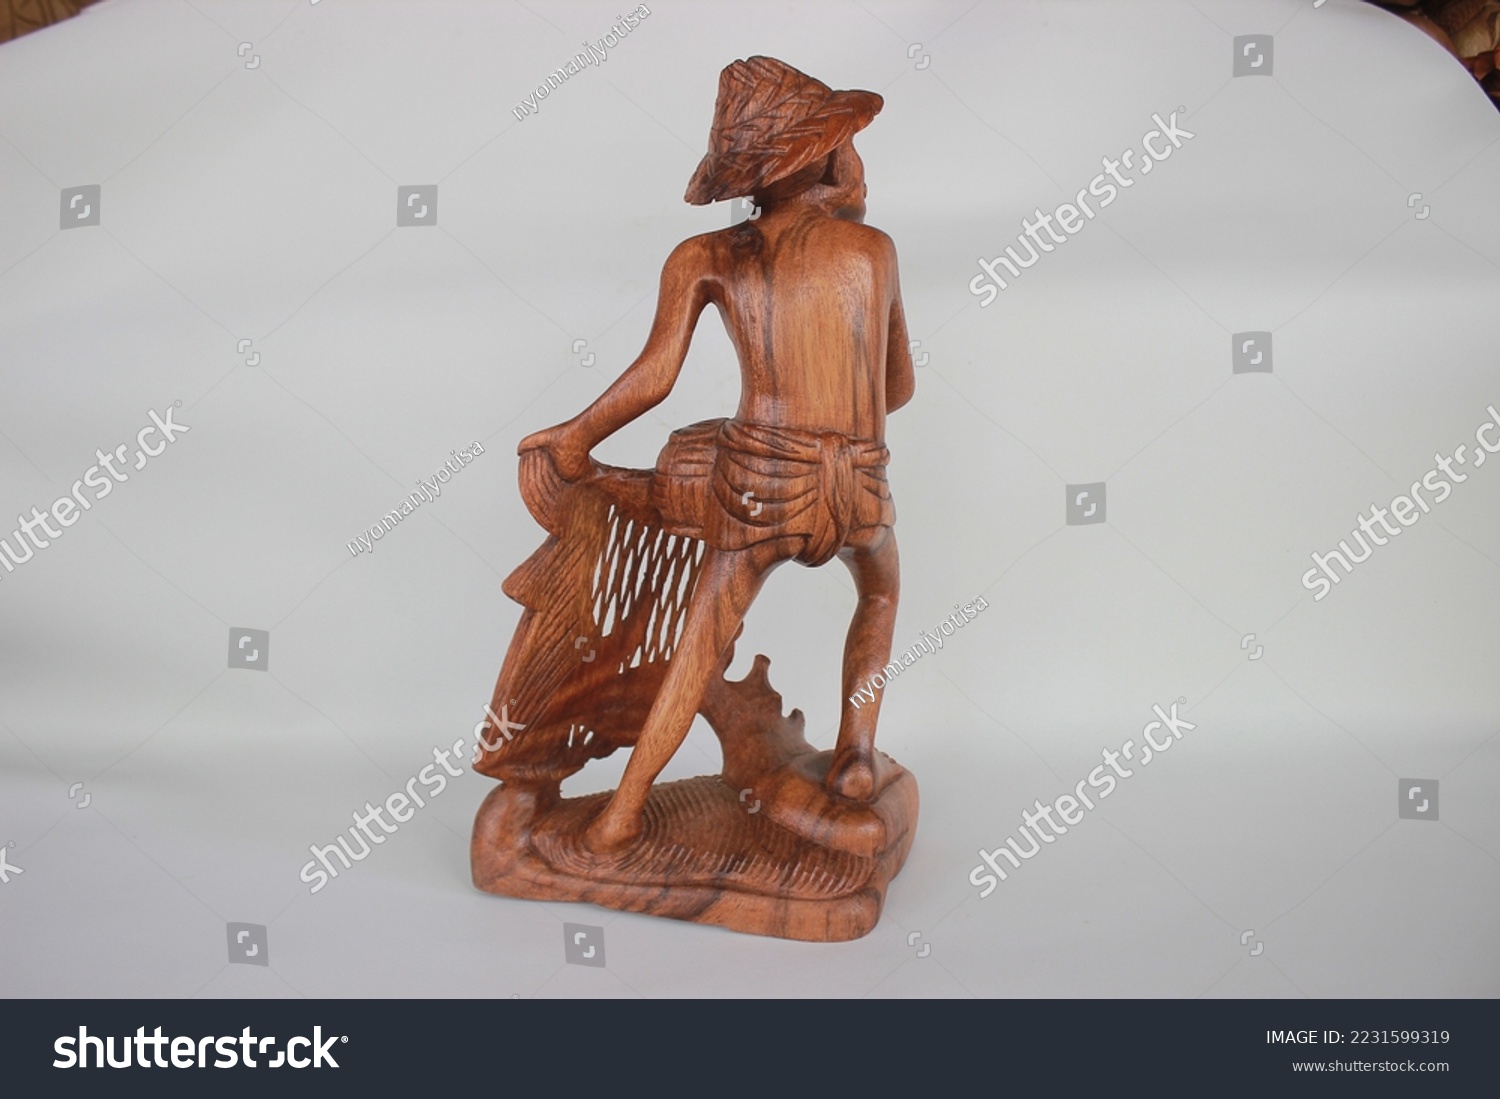 	
Balinese Wooden Fisherman Sculpture Wood Carving, Sculpture, Art from Bali Indonesia #2231599319